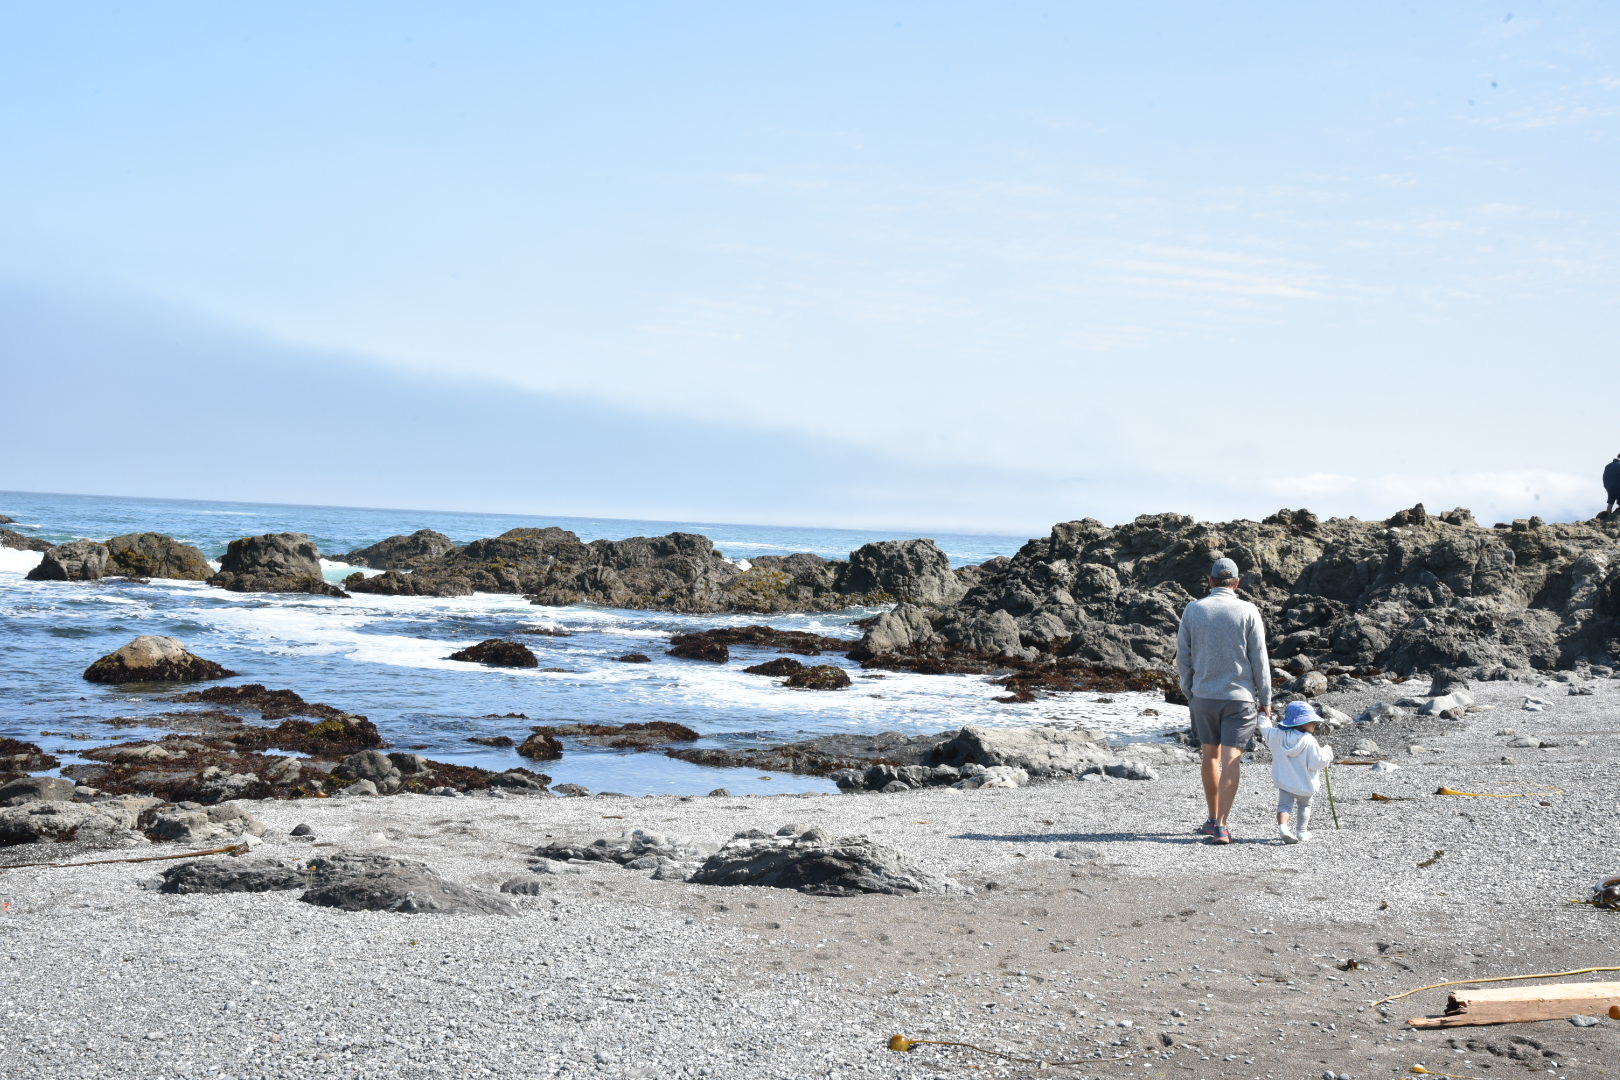 Top 10 Things to Do in Mendocino (Kid-friendly)